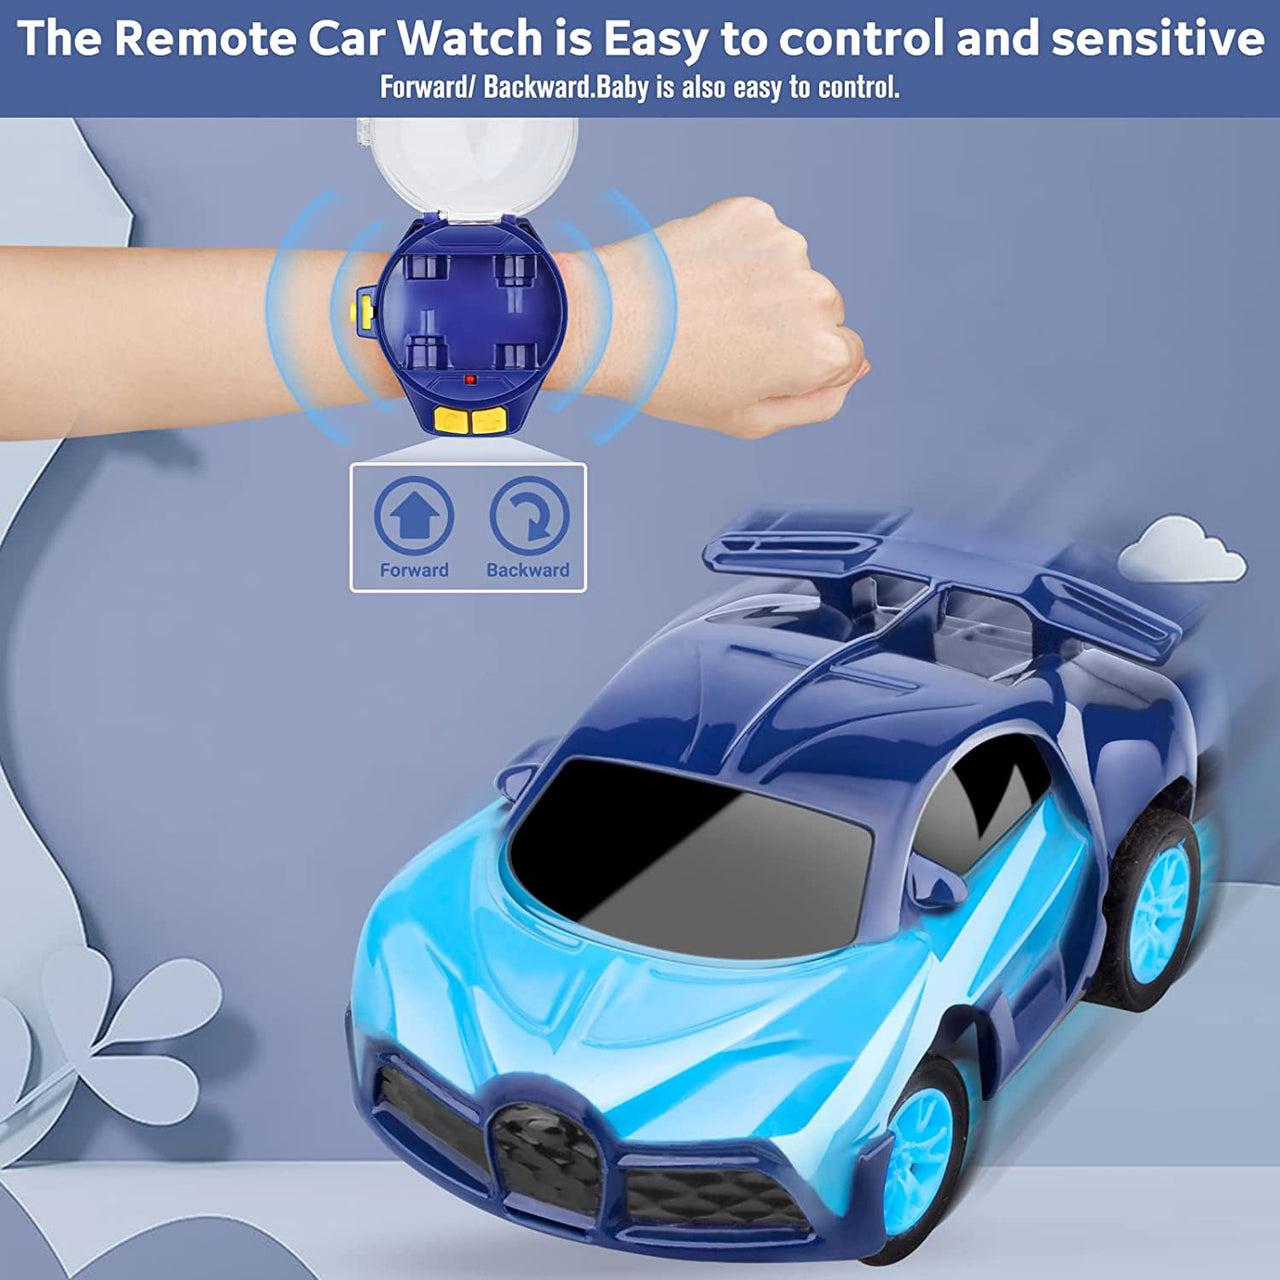 Watch Rc Car: Comparison of Various Types of Watch RC Cars